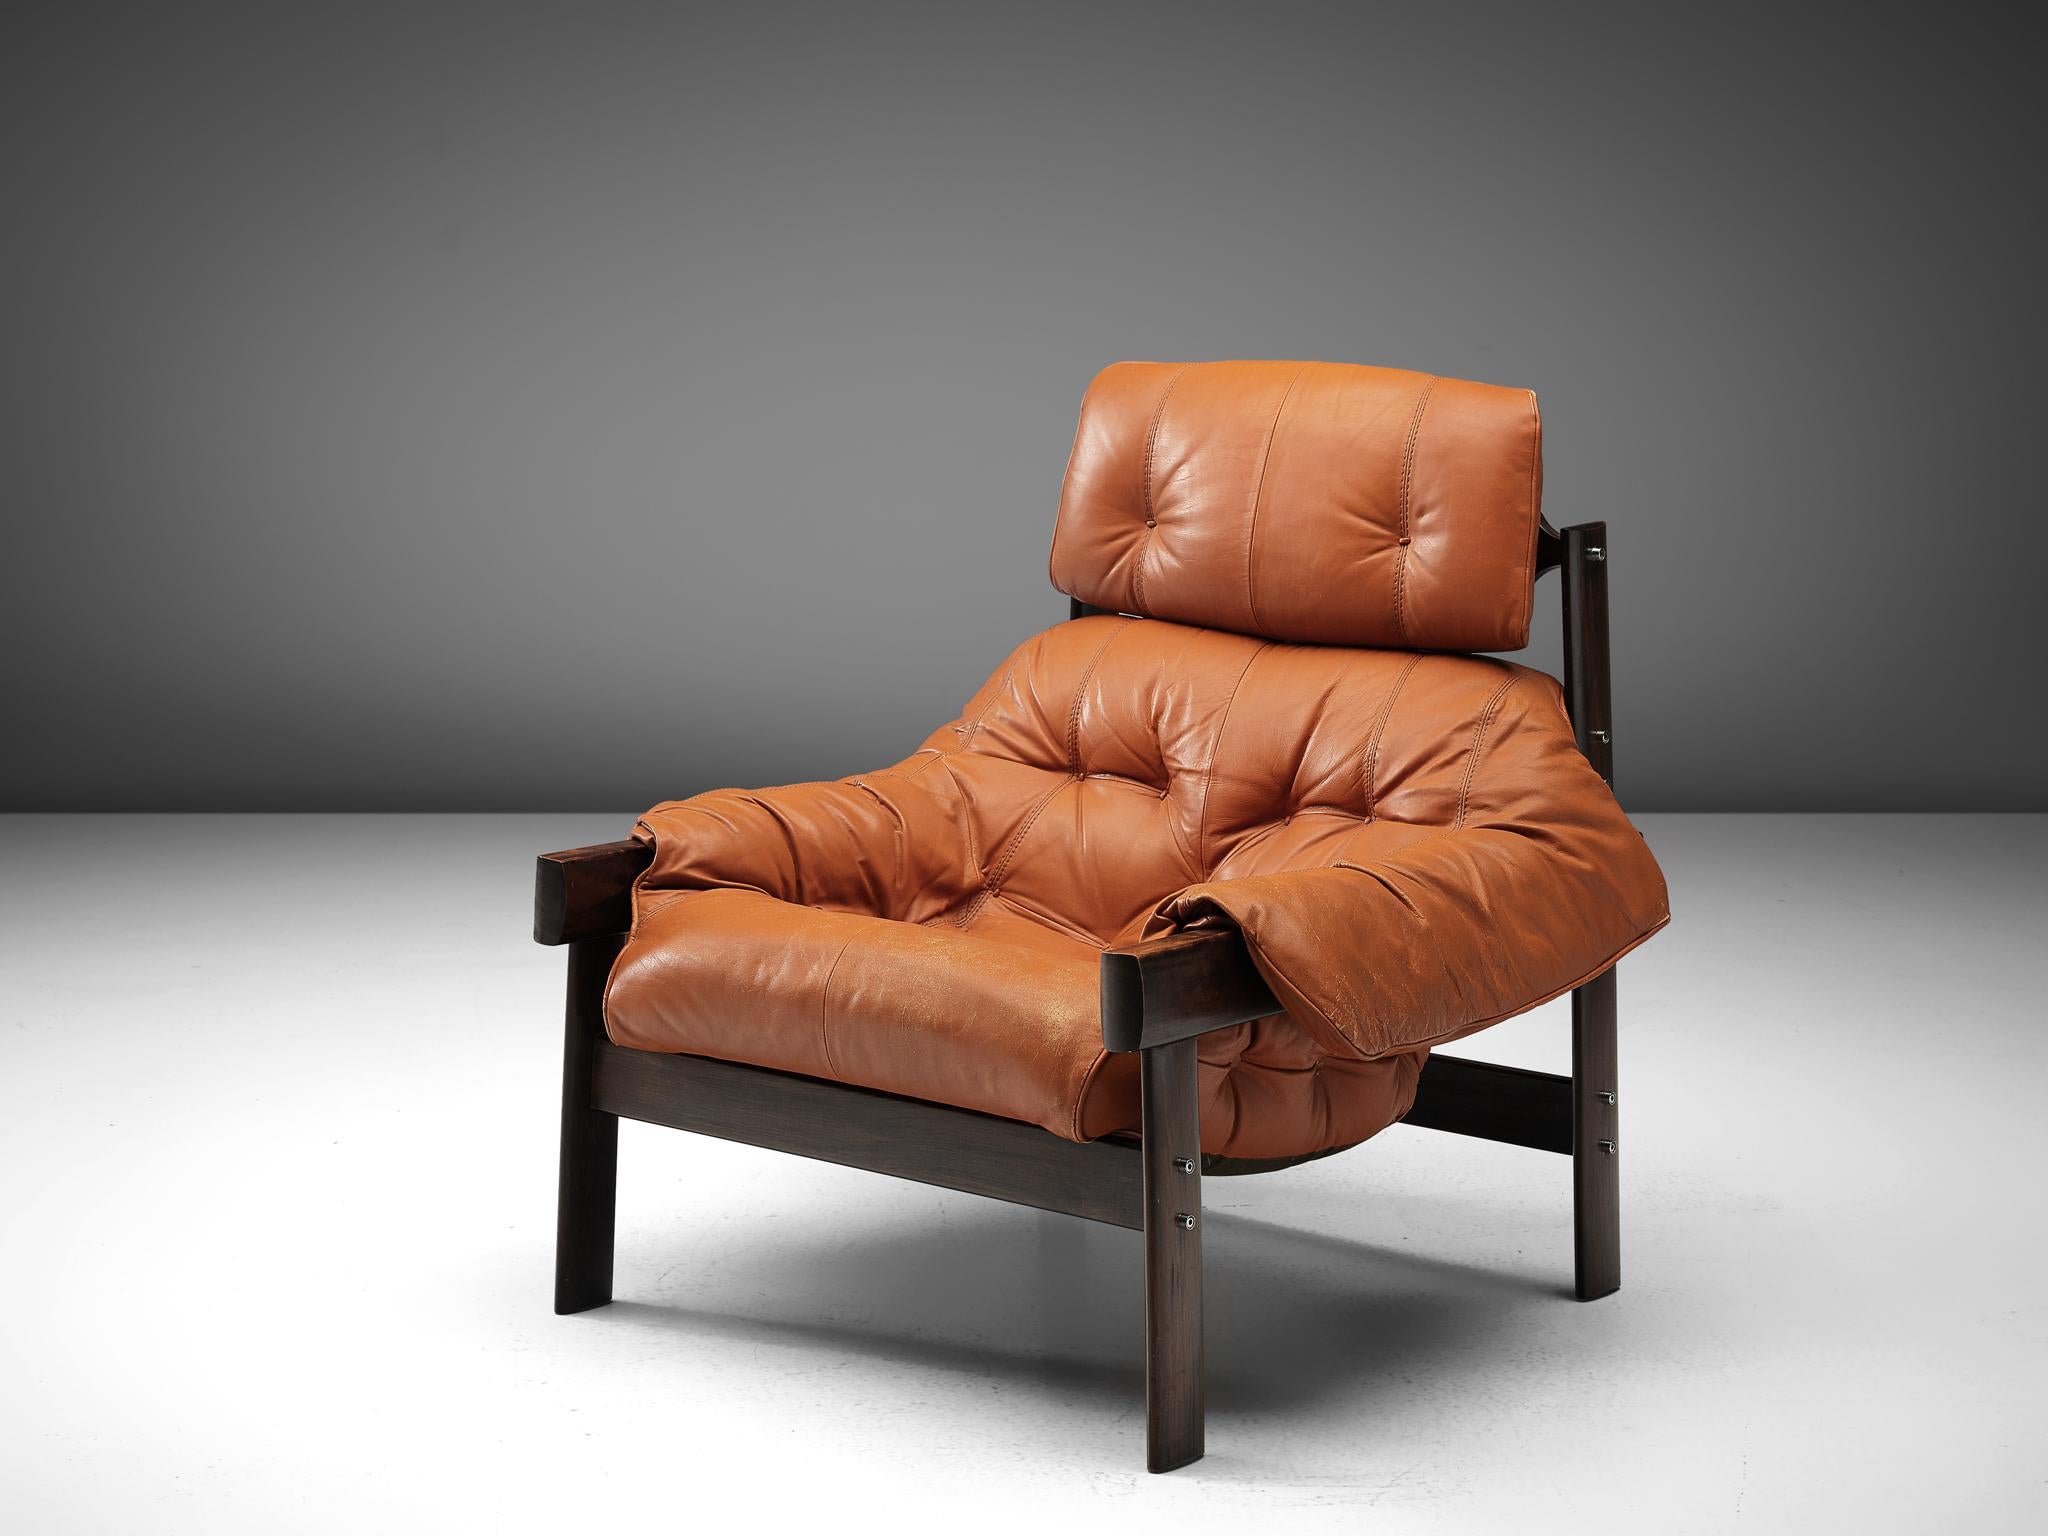 Brazilian Percival Lafer Lounge Chair with Ottoman in Dark Stained Wood and Leather